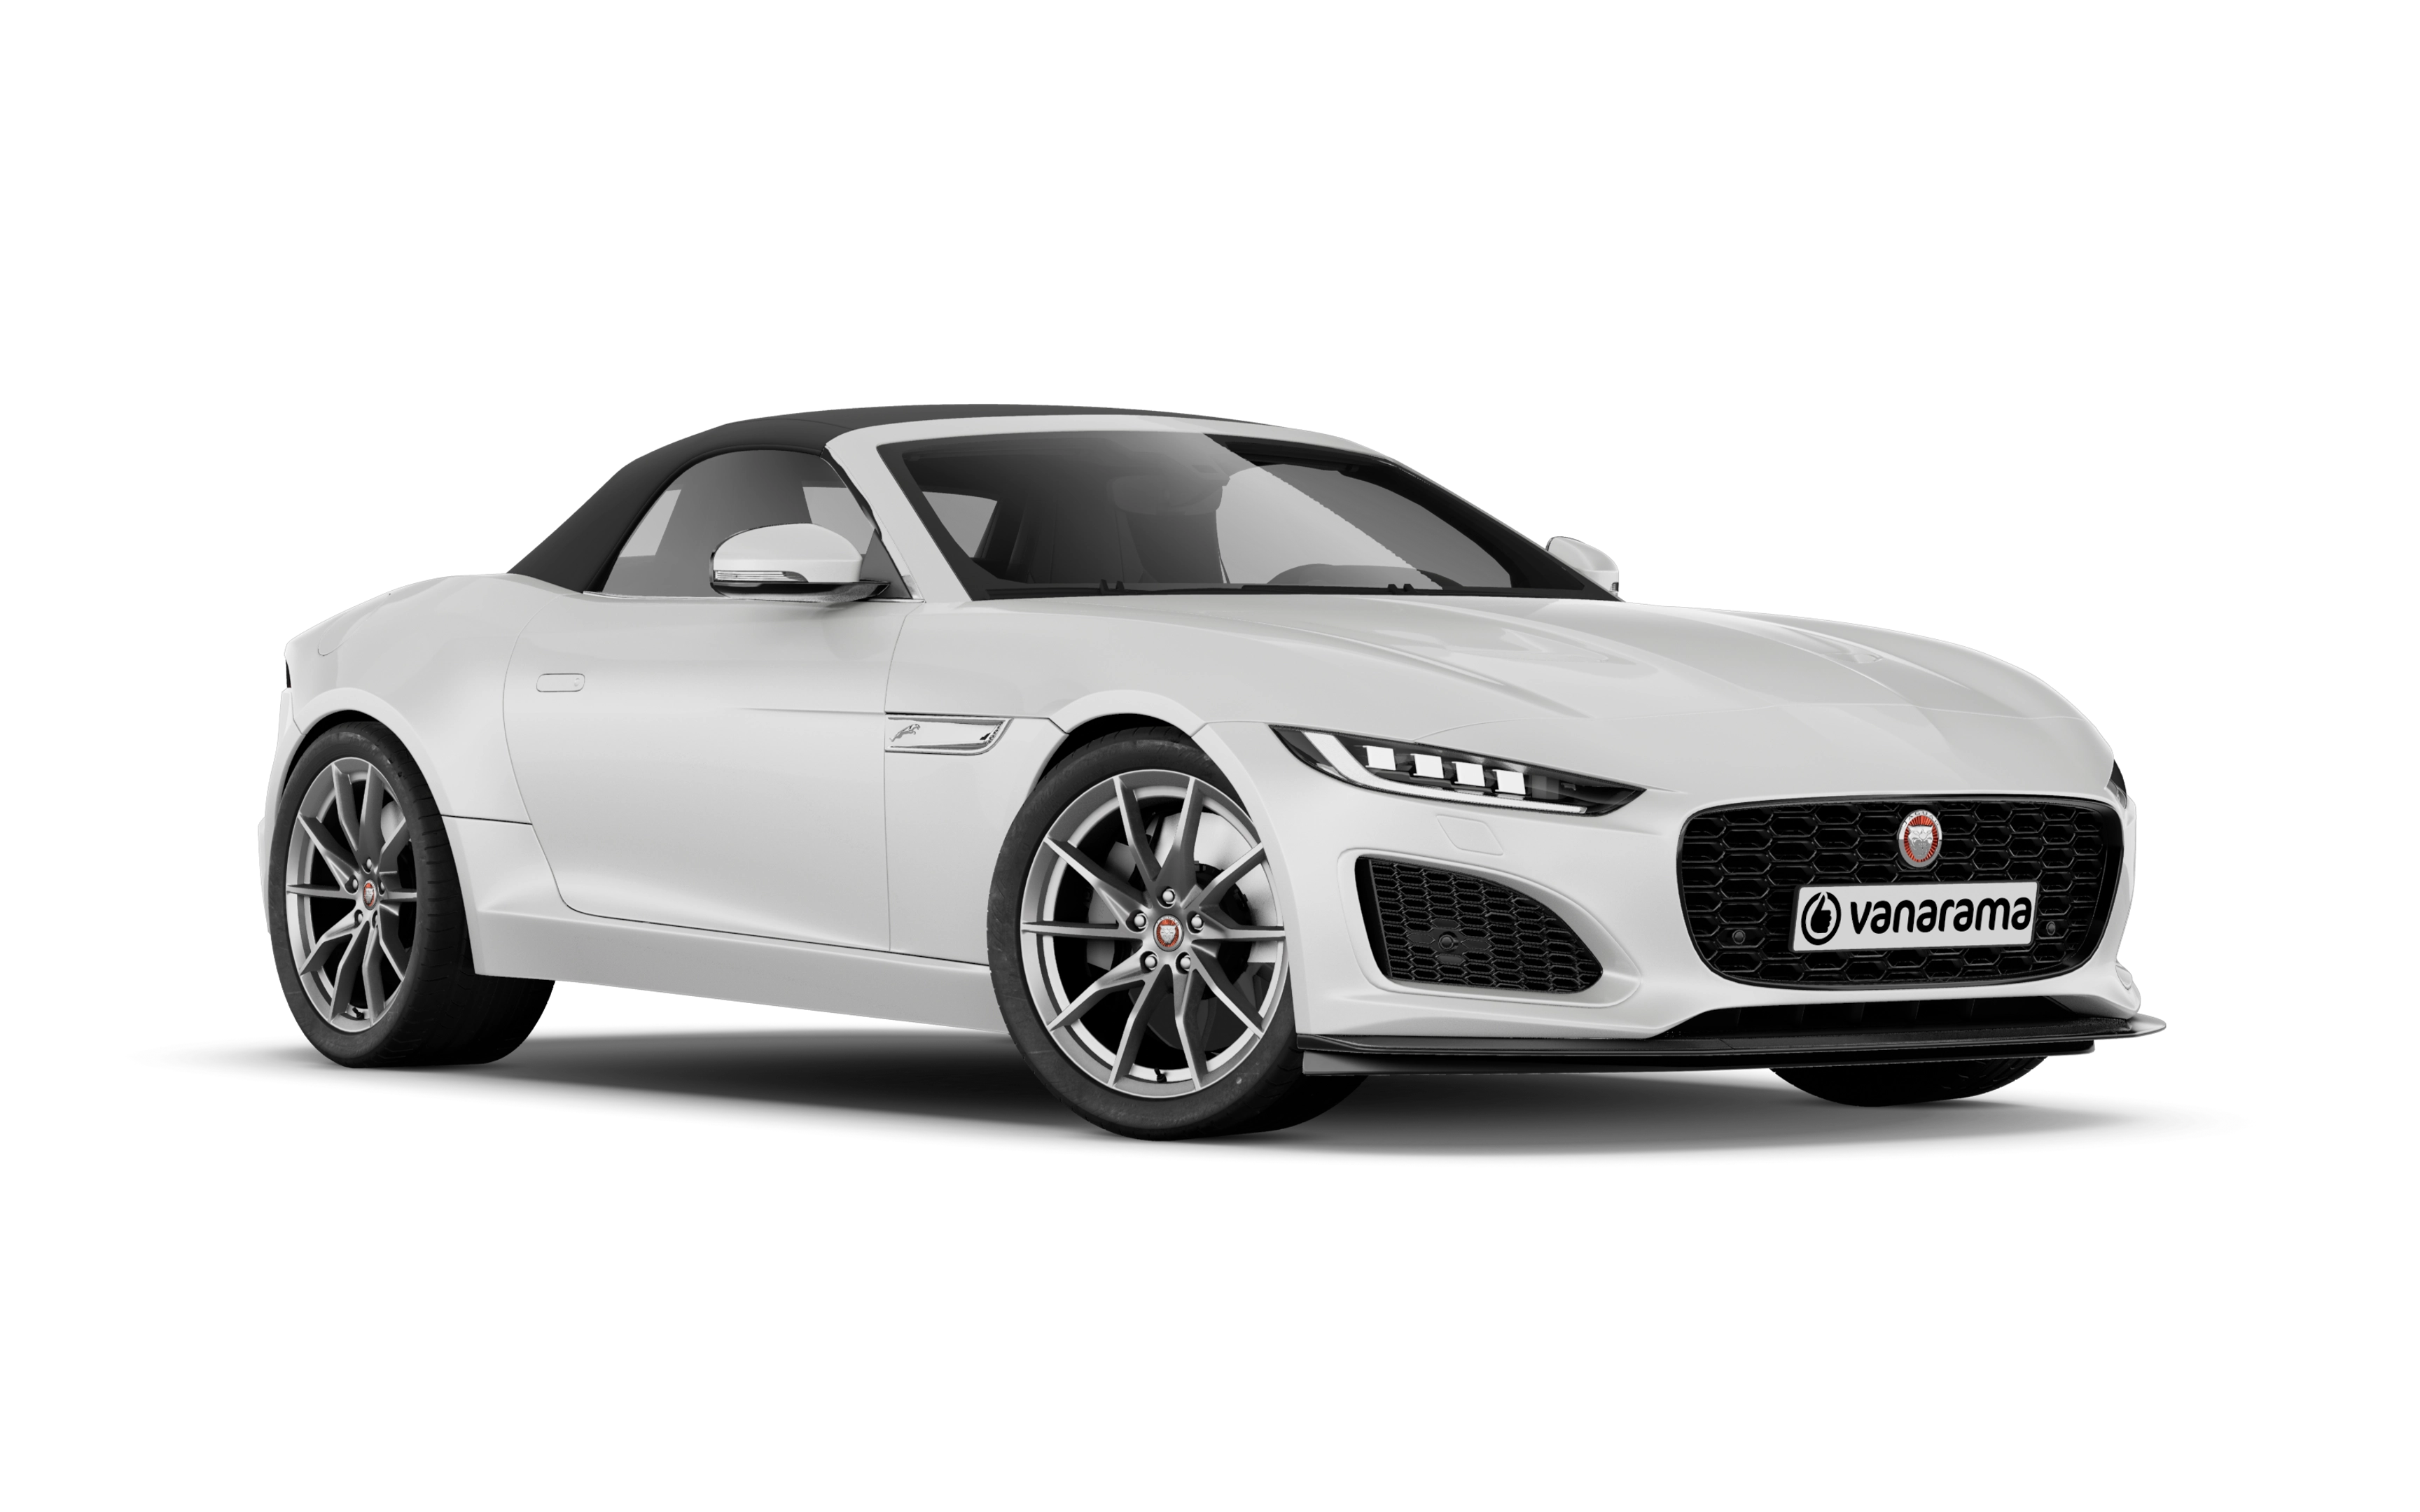 Jaguar f-type convertible 5.0 p450 supercharged v8 r-dynamic 2 doors auto awd